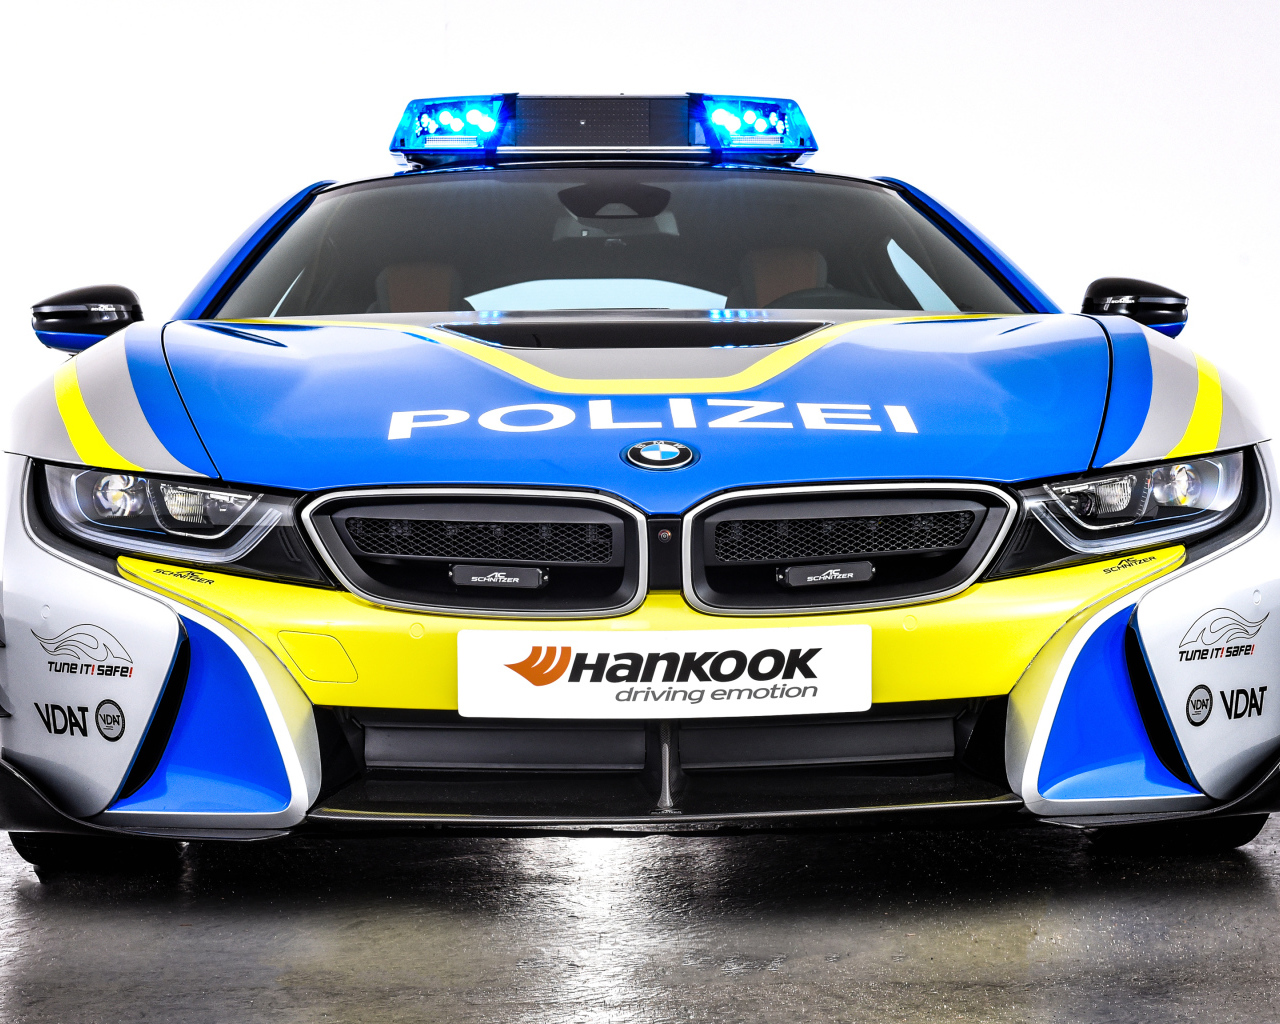 2019 BMW I8 car front view